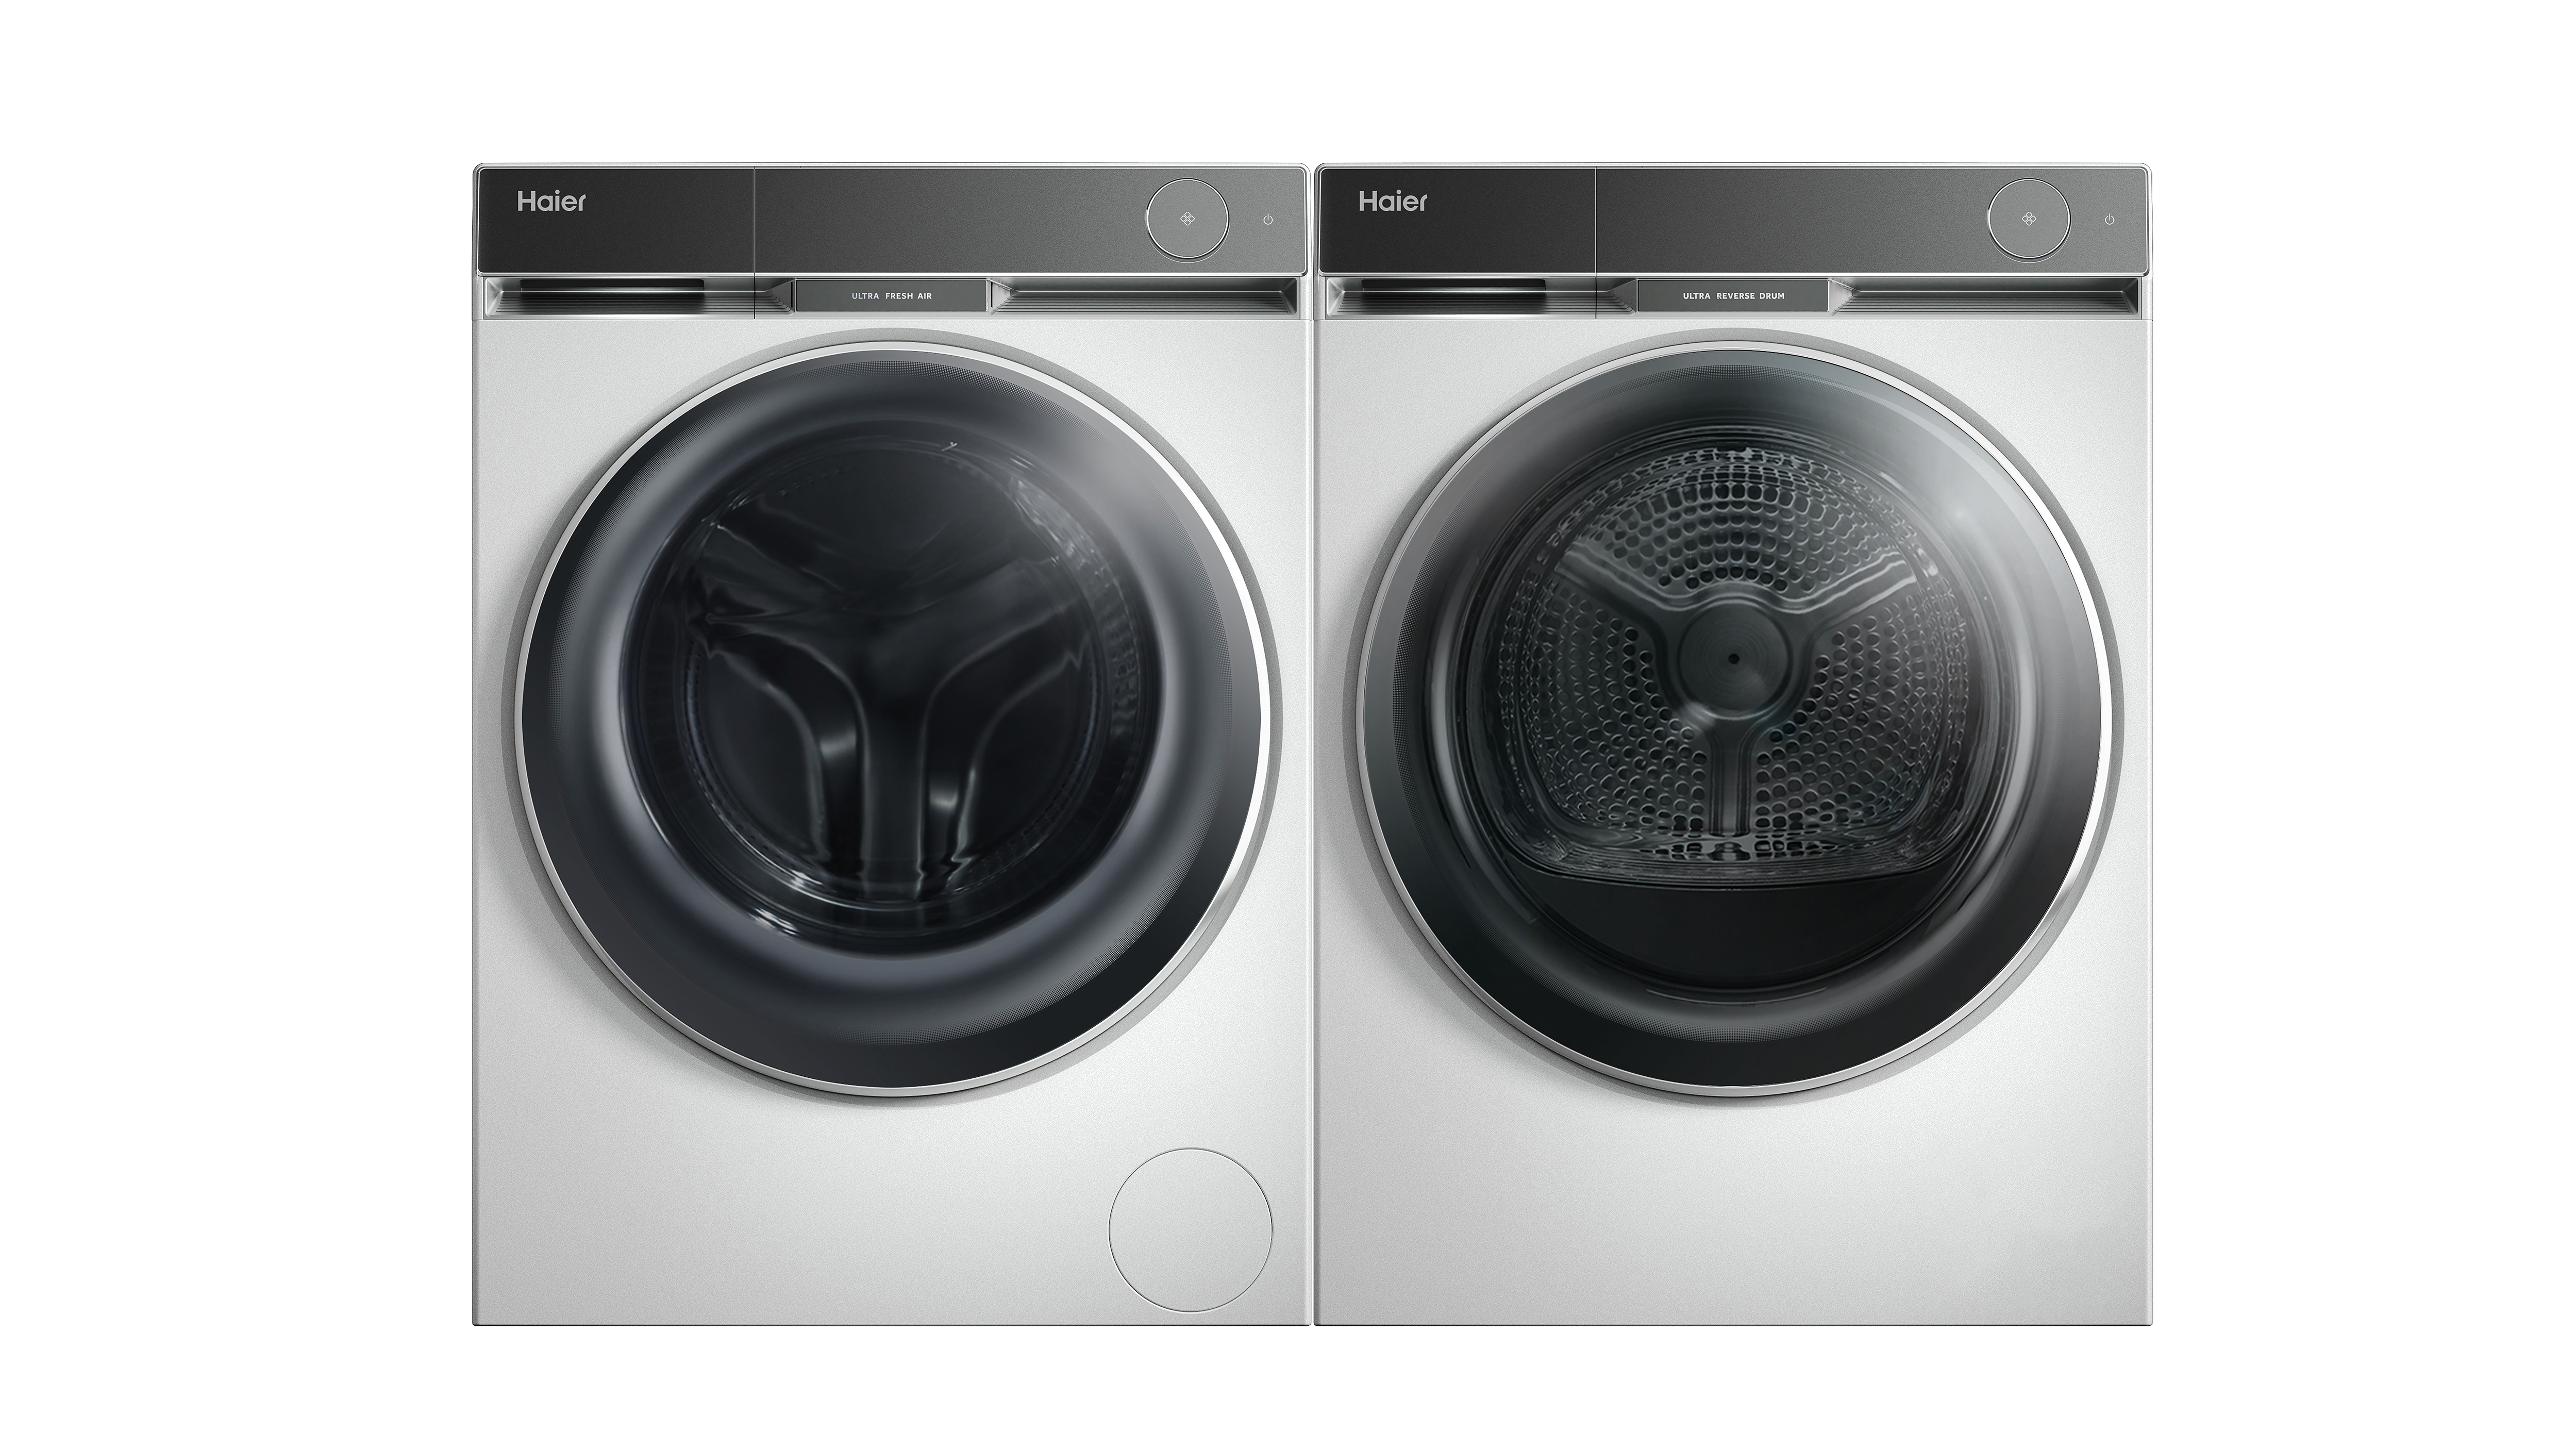 Haier X Series11 Washer and Dryer Set